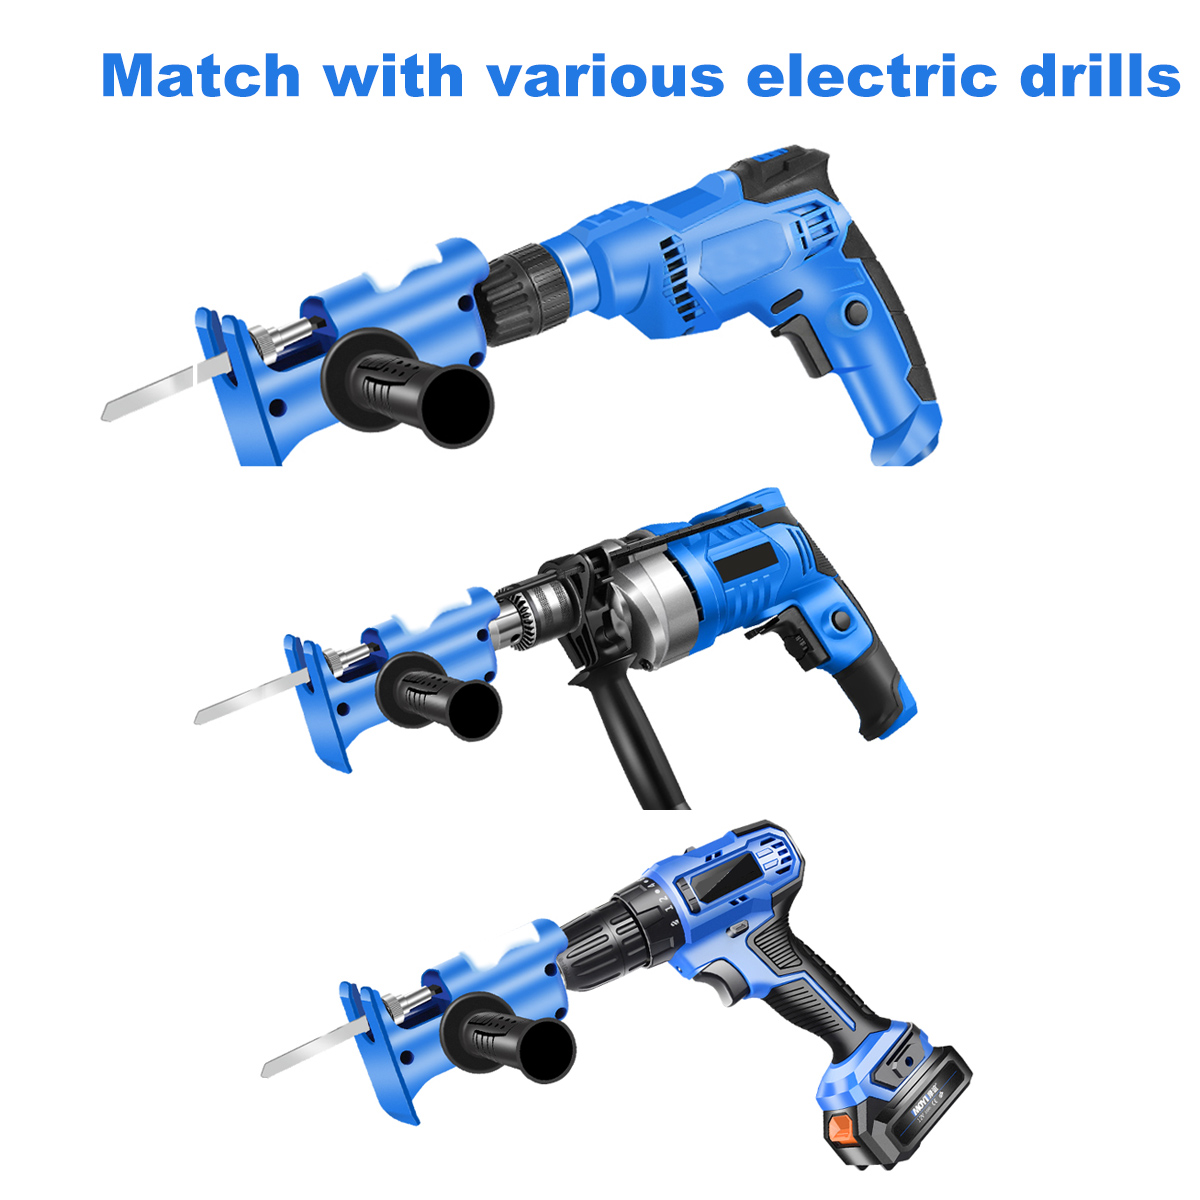 Reciprocating-Saw-Attachment-for-Electric-Drill-Wood-Metal-Cutting-Tool-1865626-3